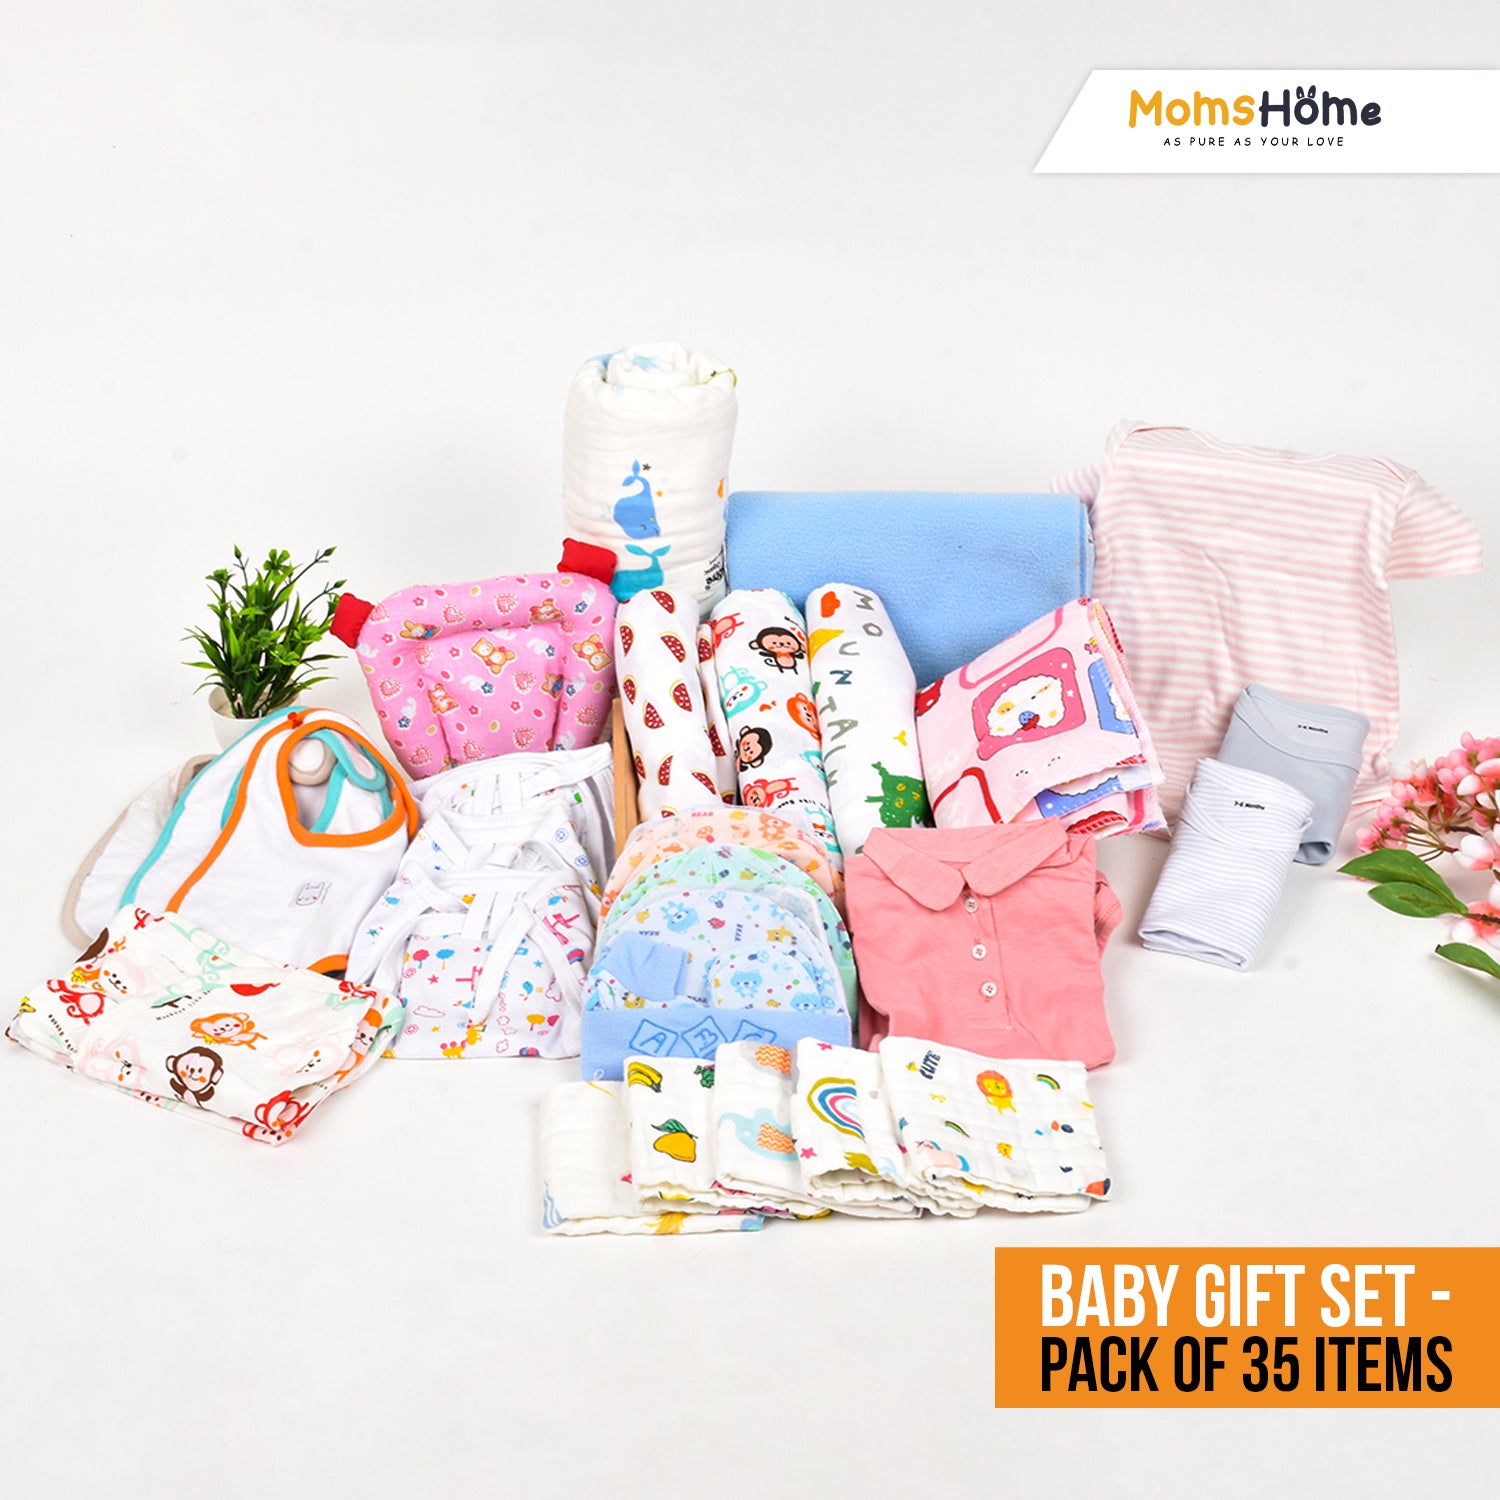 New Born Baby Essentials Gift Combo Box -0-6 Months- 35 Items